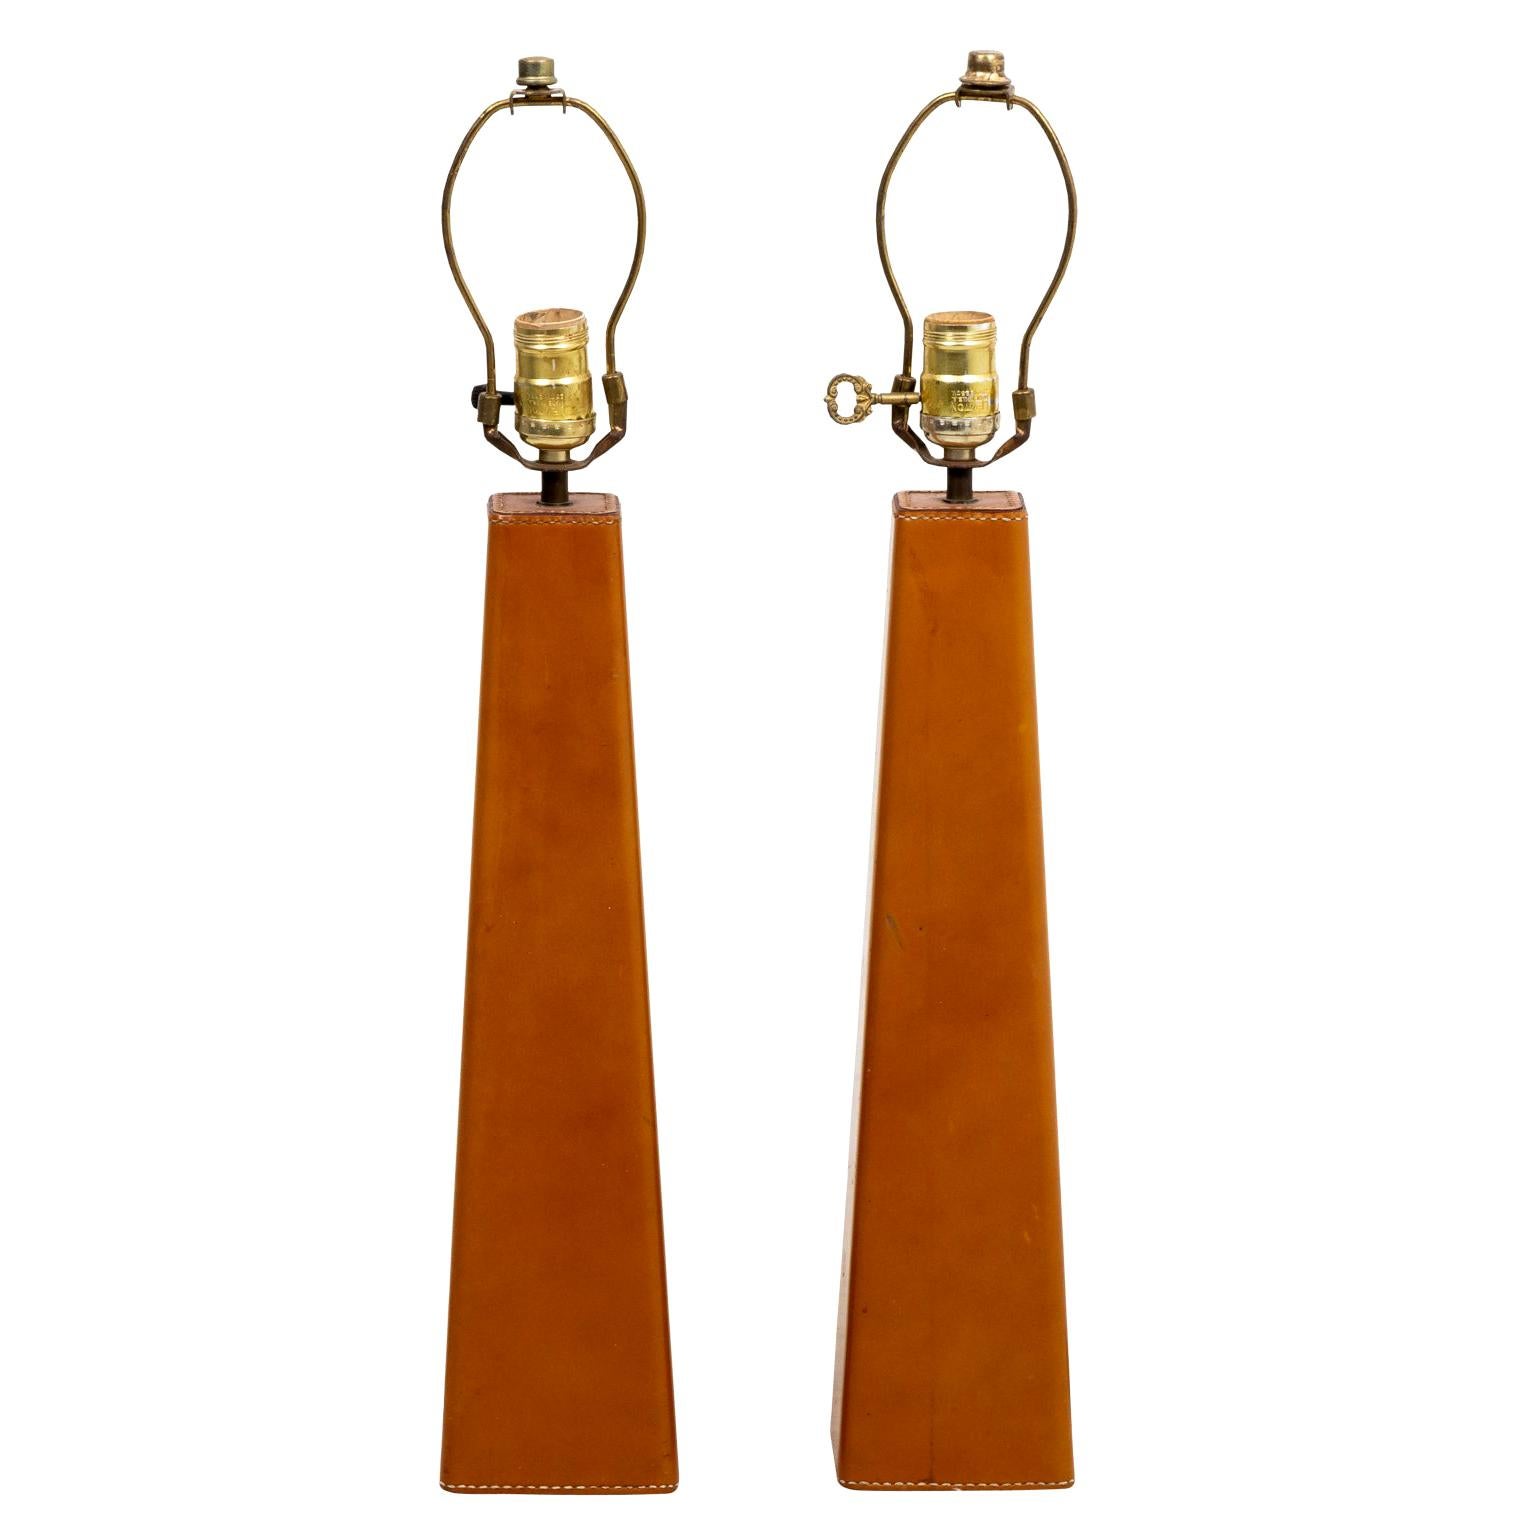 Pair of Leather Wrapped Danish Modern Lamps